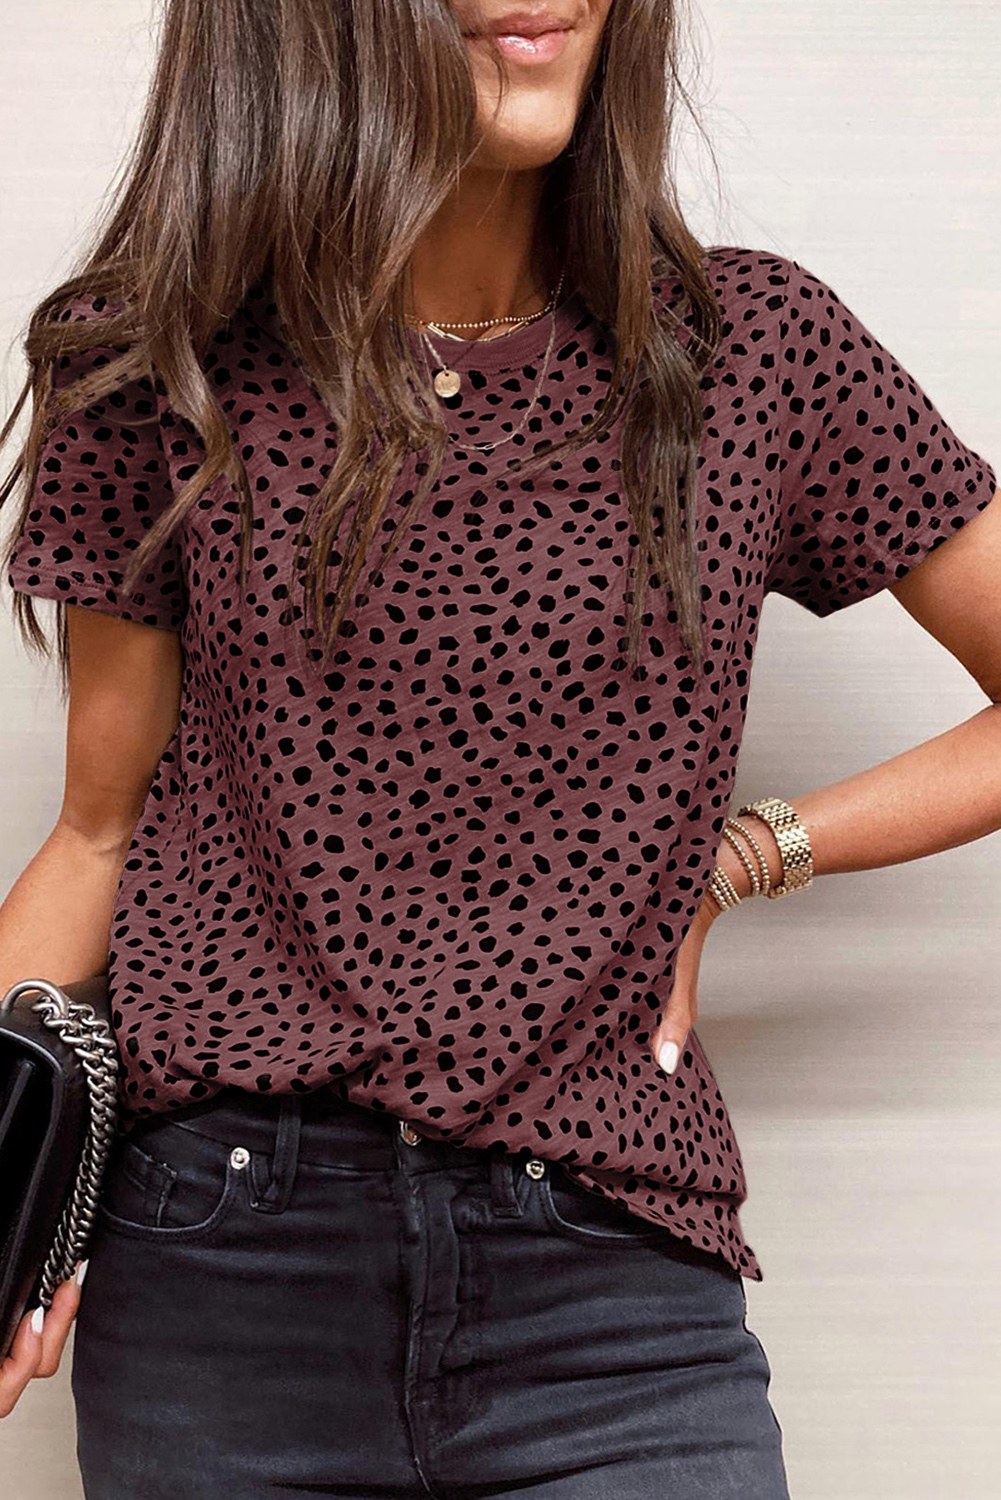 Shewin Wholesale Stores Red Cheetah Print Casual Short Sleeve Crew Neck T SHIRT